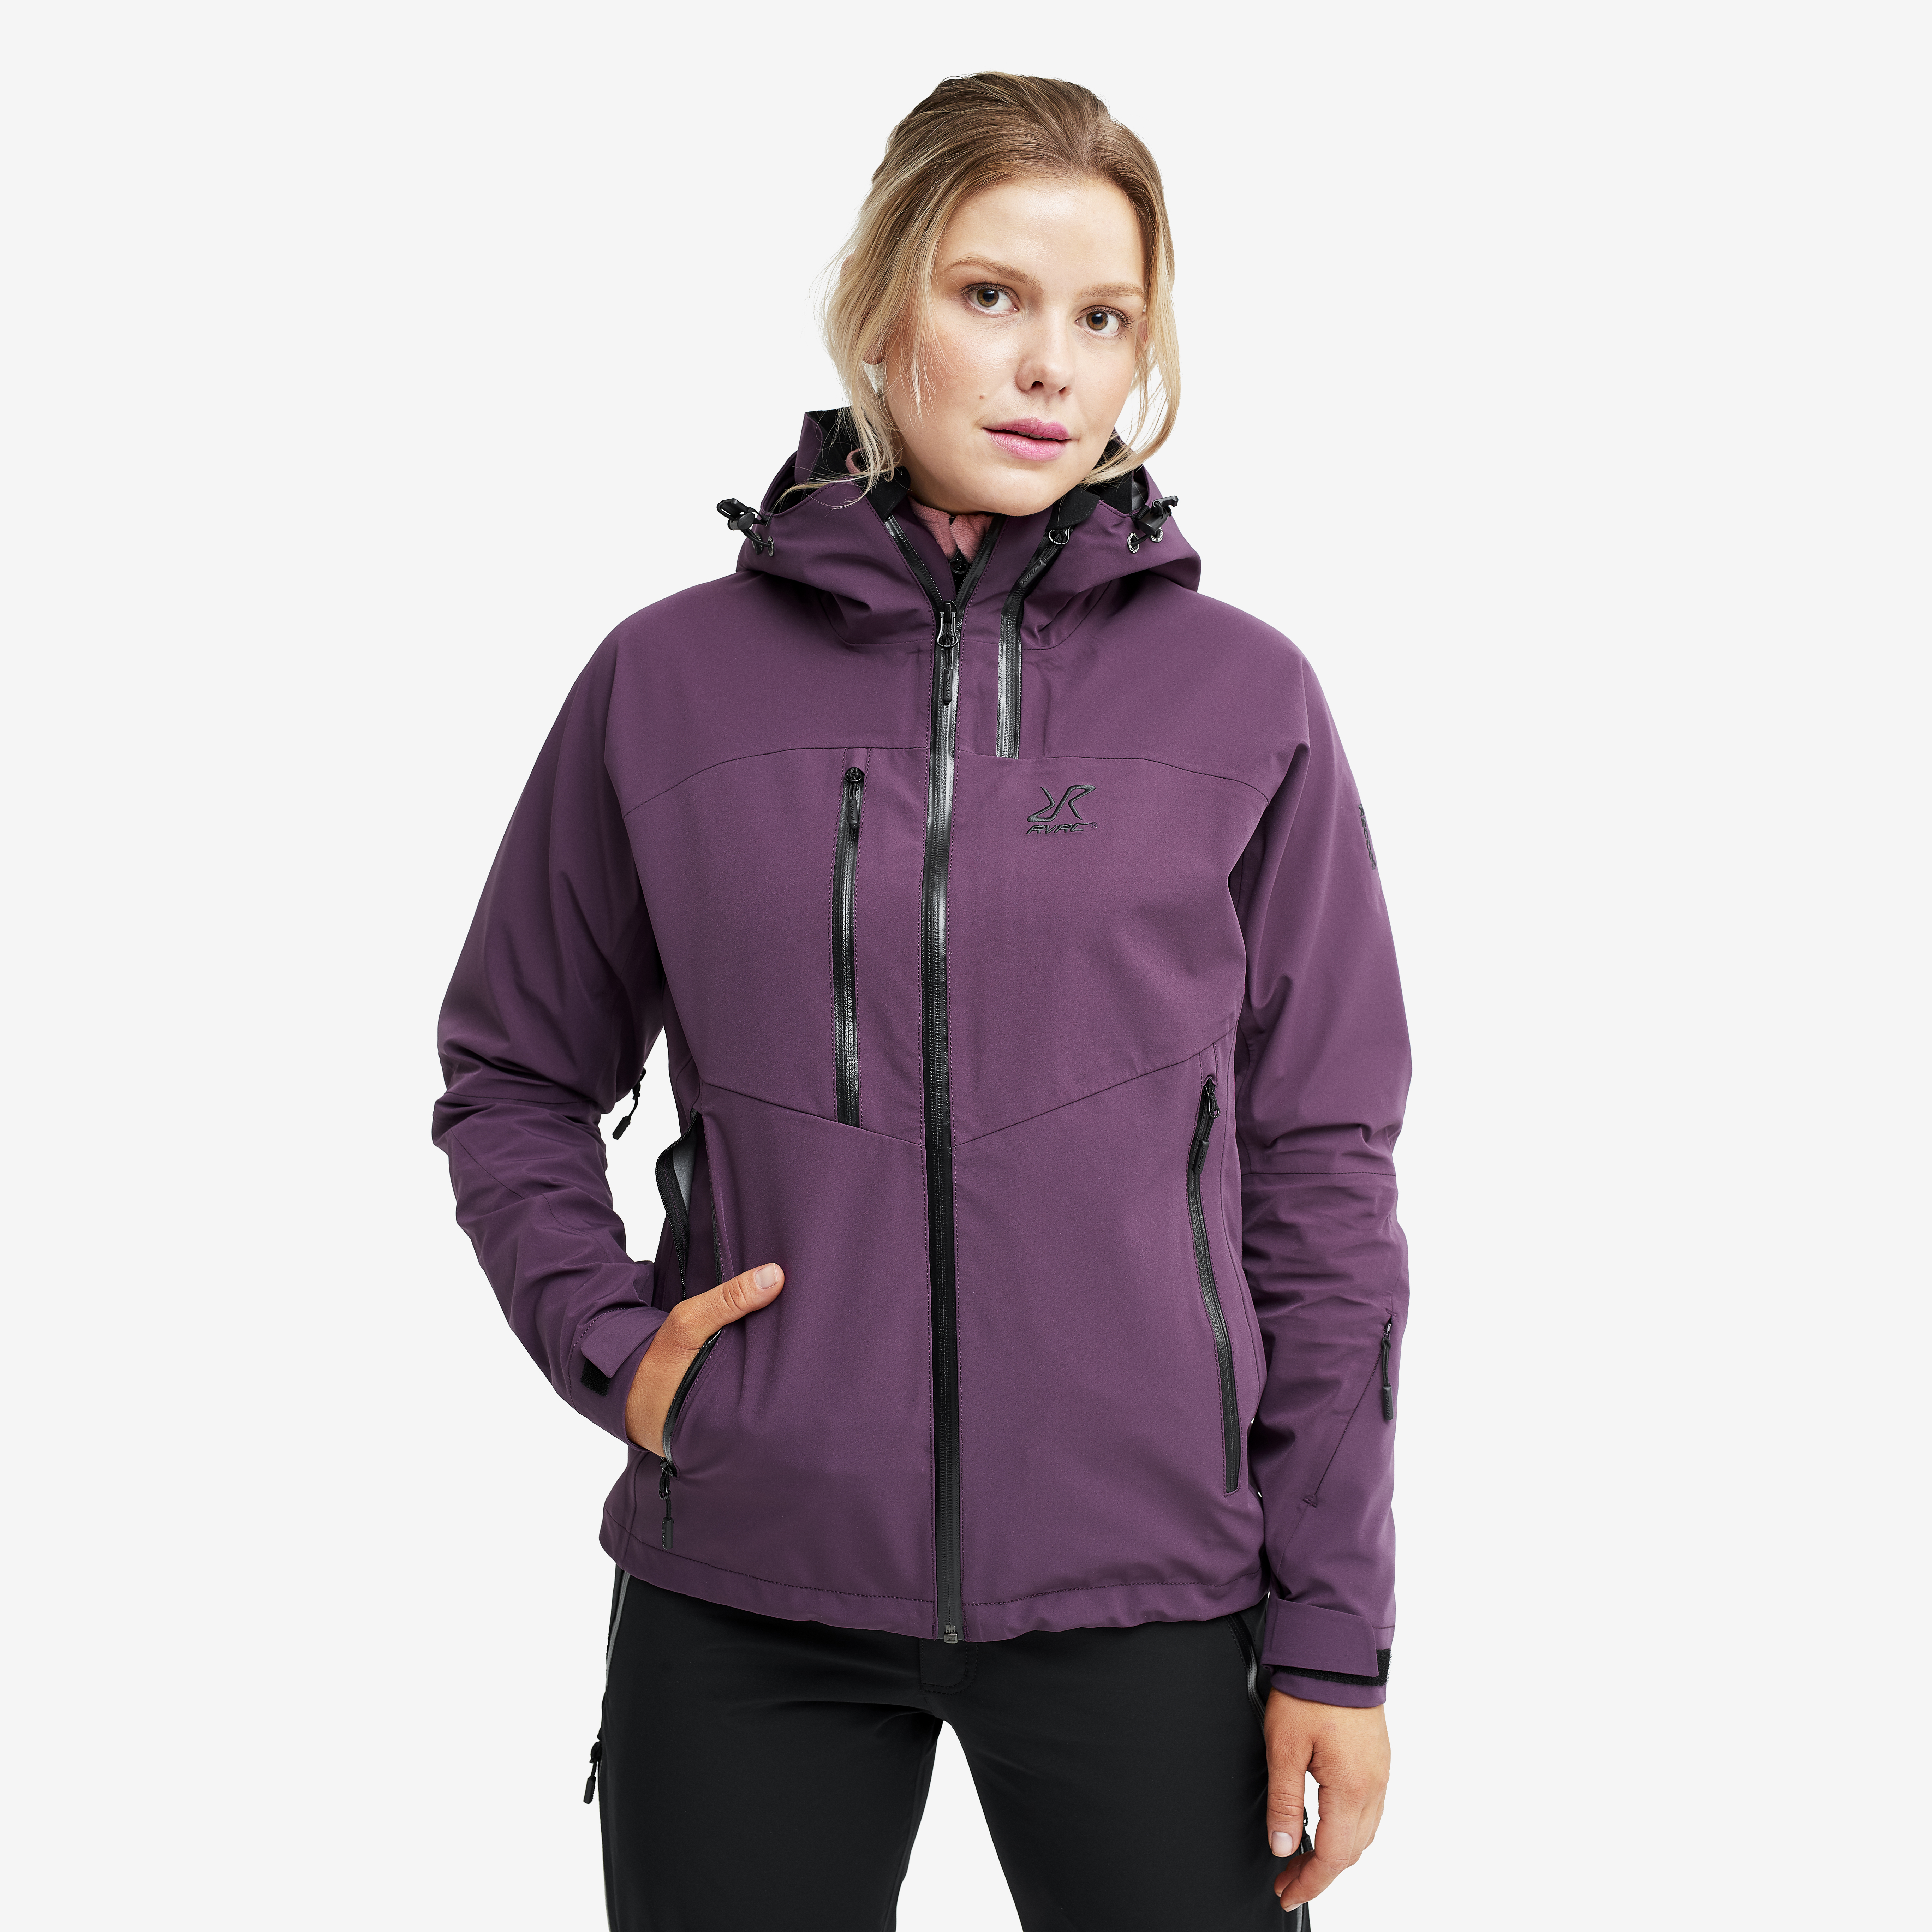 Cyclone Rescue Jacket 2.0 Blackberry Mujeres